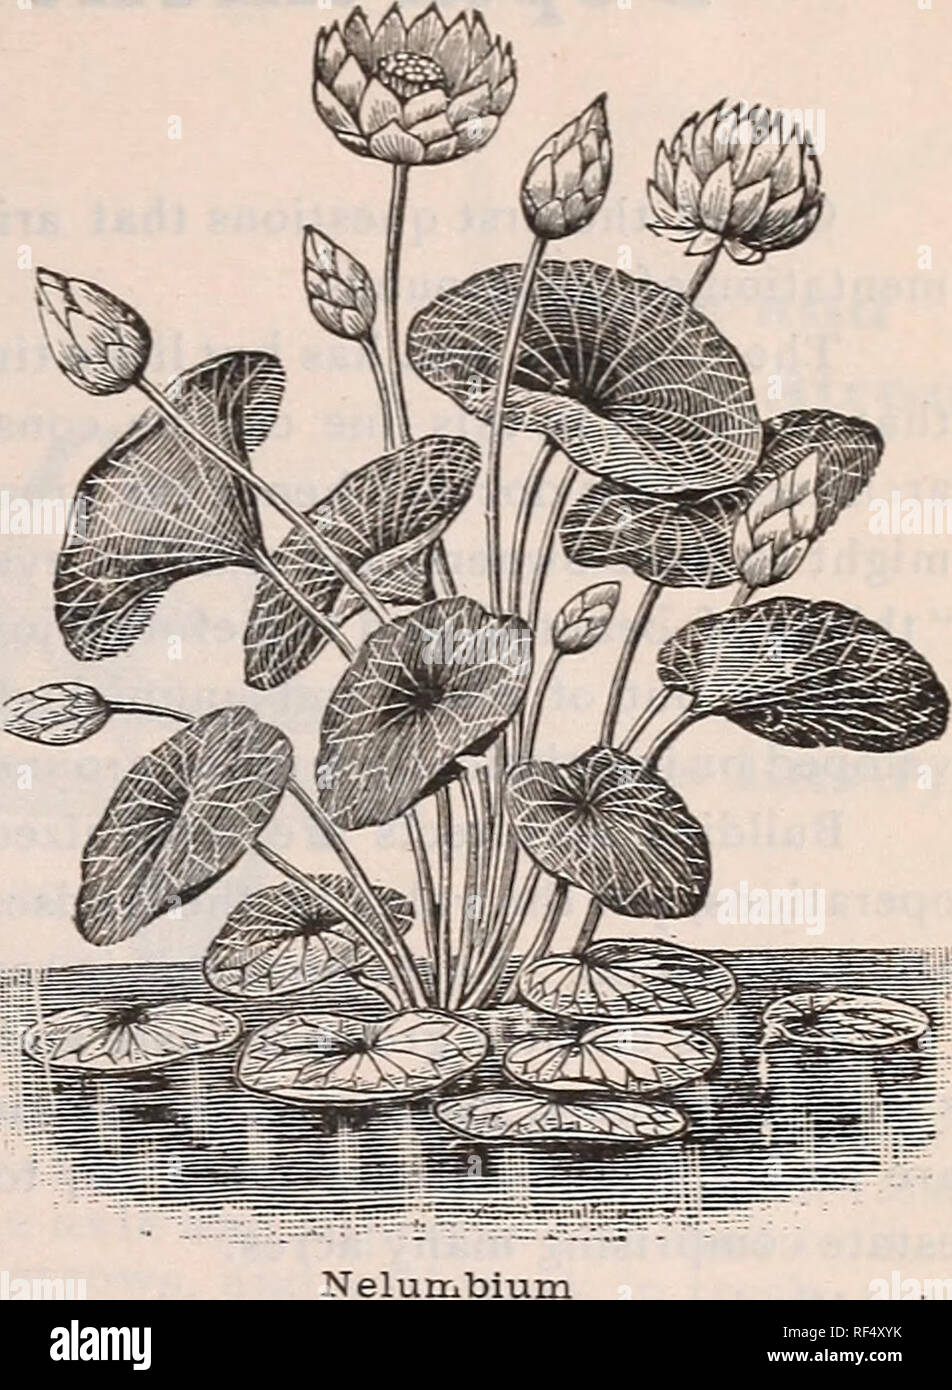 . Annual descriptive catalogue : seeds &amp;c.. Nursery stock, Massachusetts, Boston, Catalogs; Flowers, Seeds, Catalogs; Vegetables, Seeds, Catalogs; Grasses, Seeds, Catalogs; Agricultural implements, Catalogs; Fruit, Catalogs. CATALOGUE OF AQUATIC PLANTS. syii HARDY VARIETIES. NELUMBIUM. Speciosum. (Egyptian Lotus.) The well-known and far-famed species. The flowers, which are about a foot across when fully opened, are of a deep rose color, with a soft creamy white at bases of the petals; exquisitely fragrant. Flowering tubers, 75 cts. and $1.50 each. —Luteum. (American Lotus.) This grand Lot Stock Photo